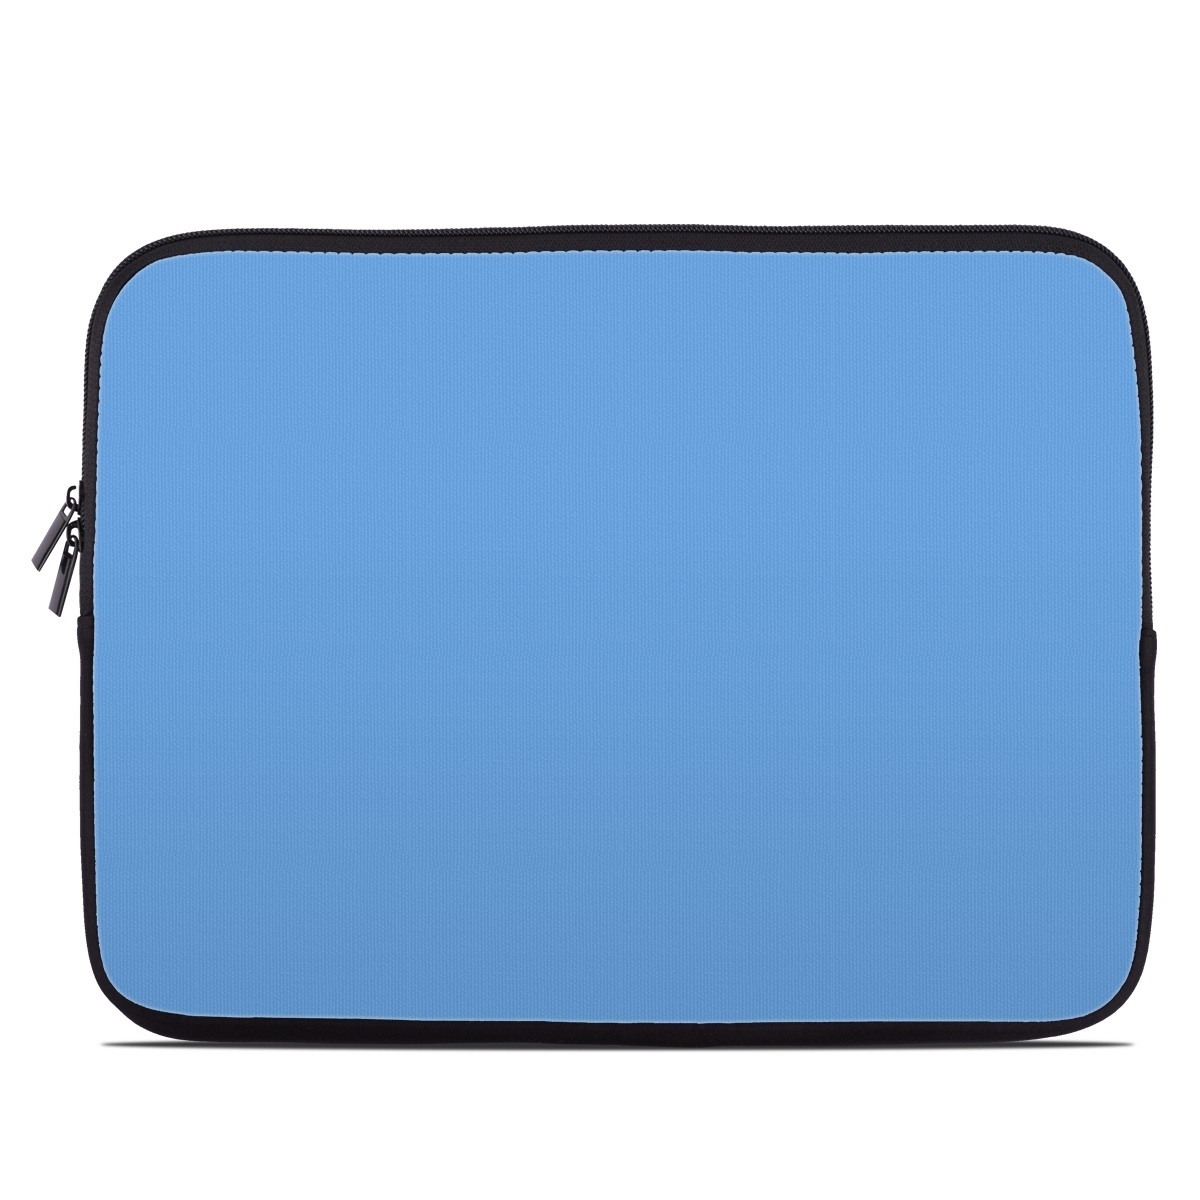 Laptop Sleeve - Solid State Blue (Image 1)